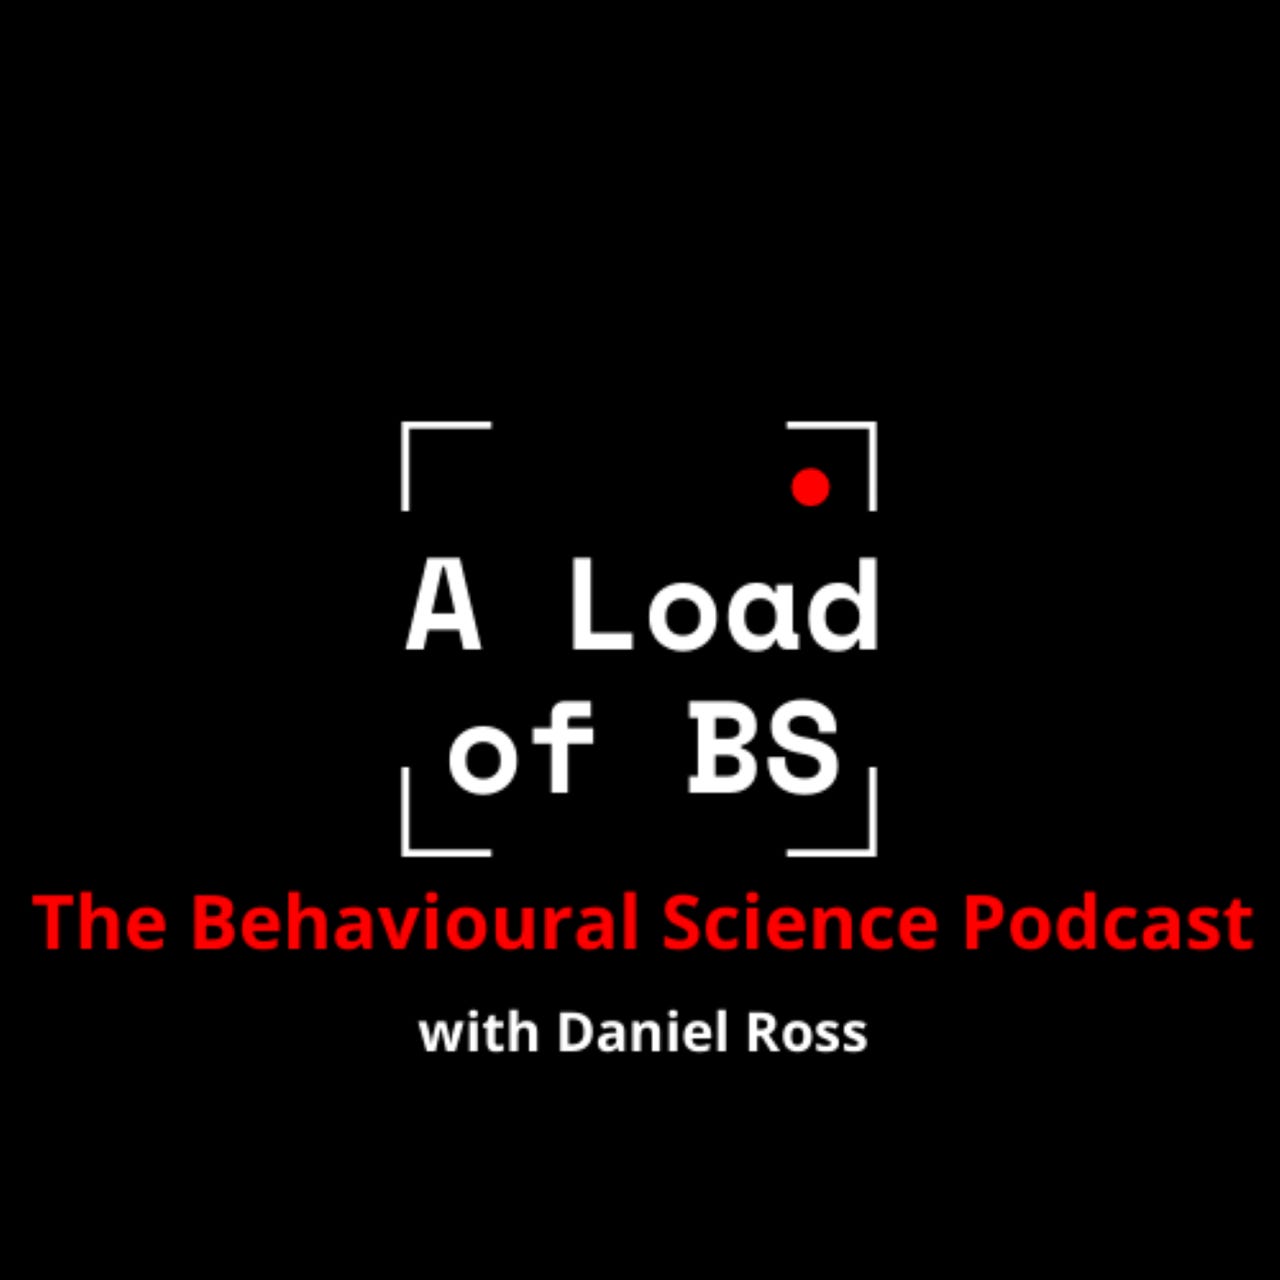 A Load of BS: The Behavioural Science Podcast